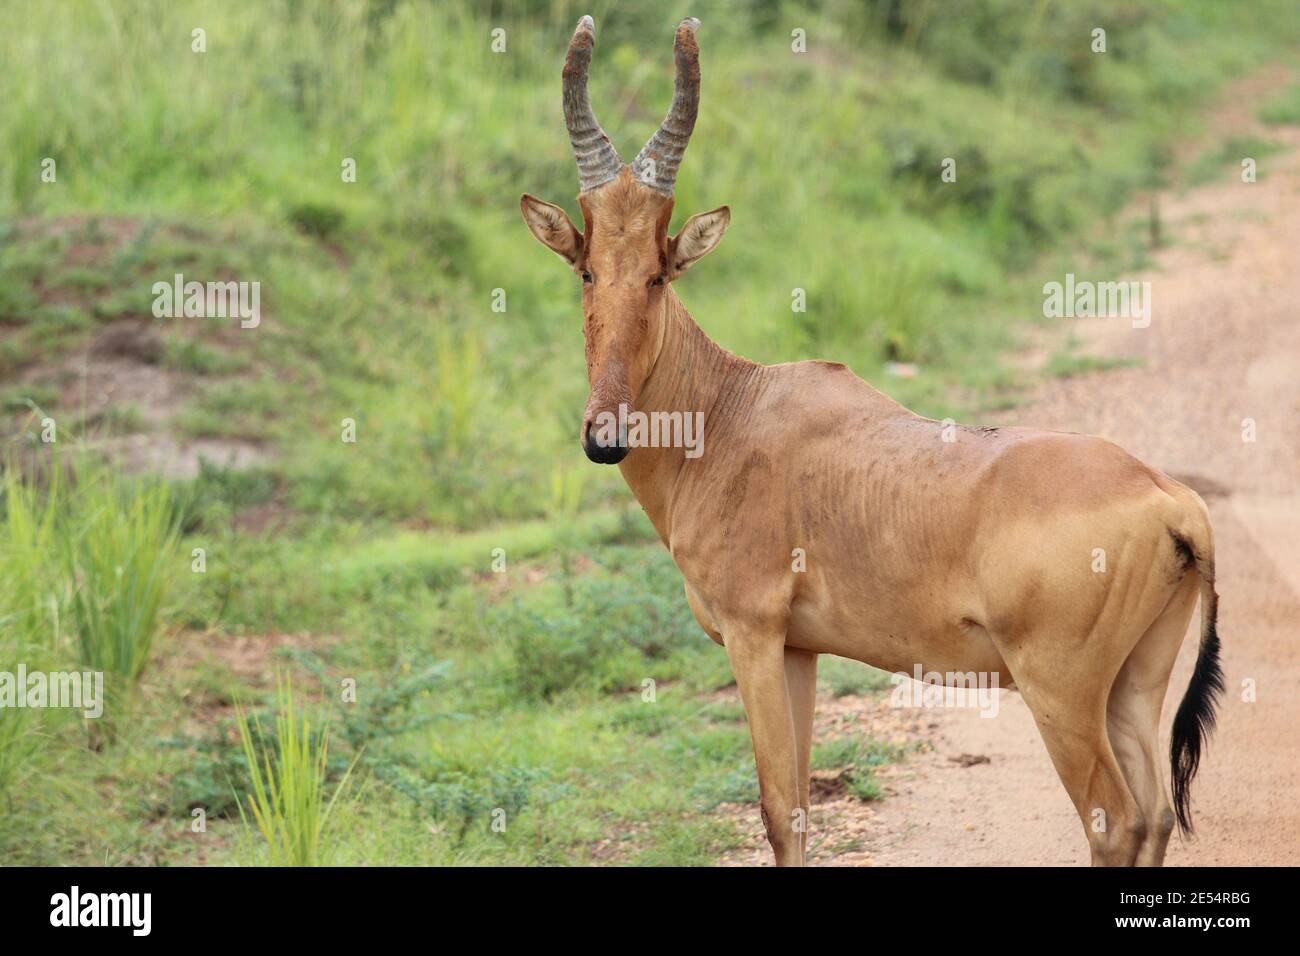 A Jackson's hartebeest in the Murchison Falls National Park in Uganda Stock Photo